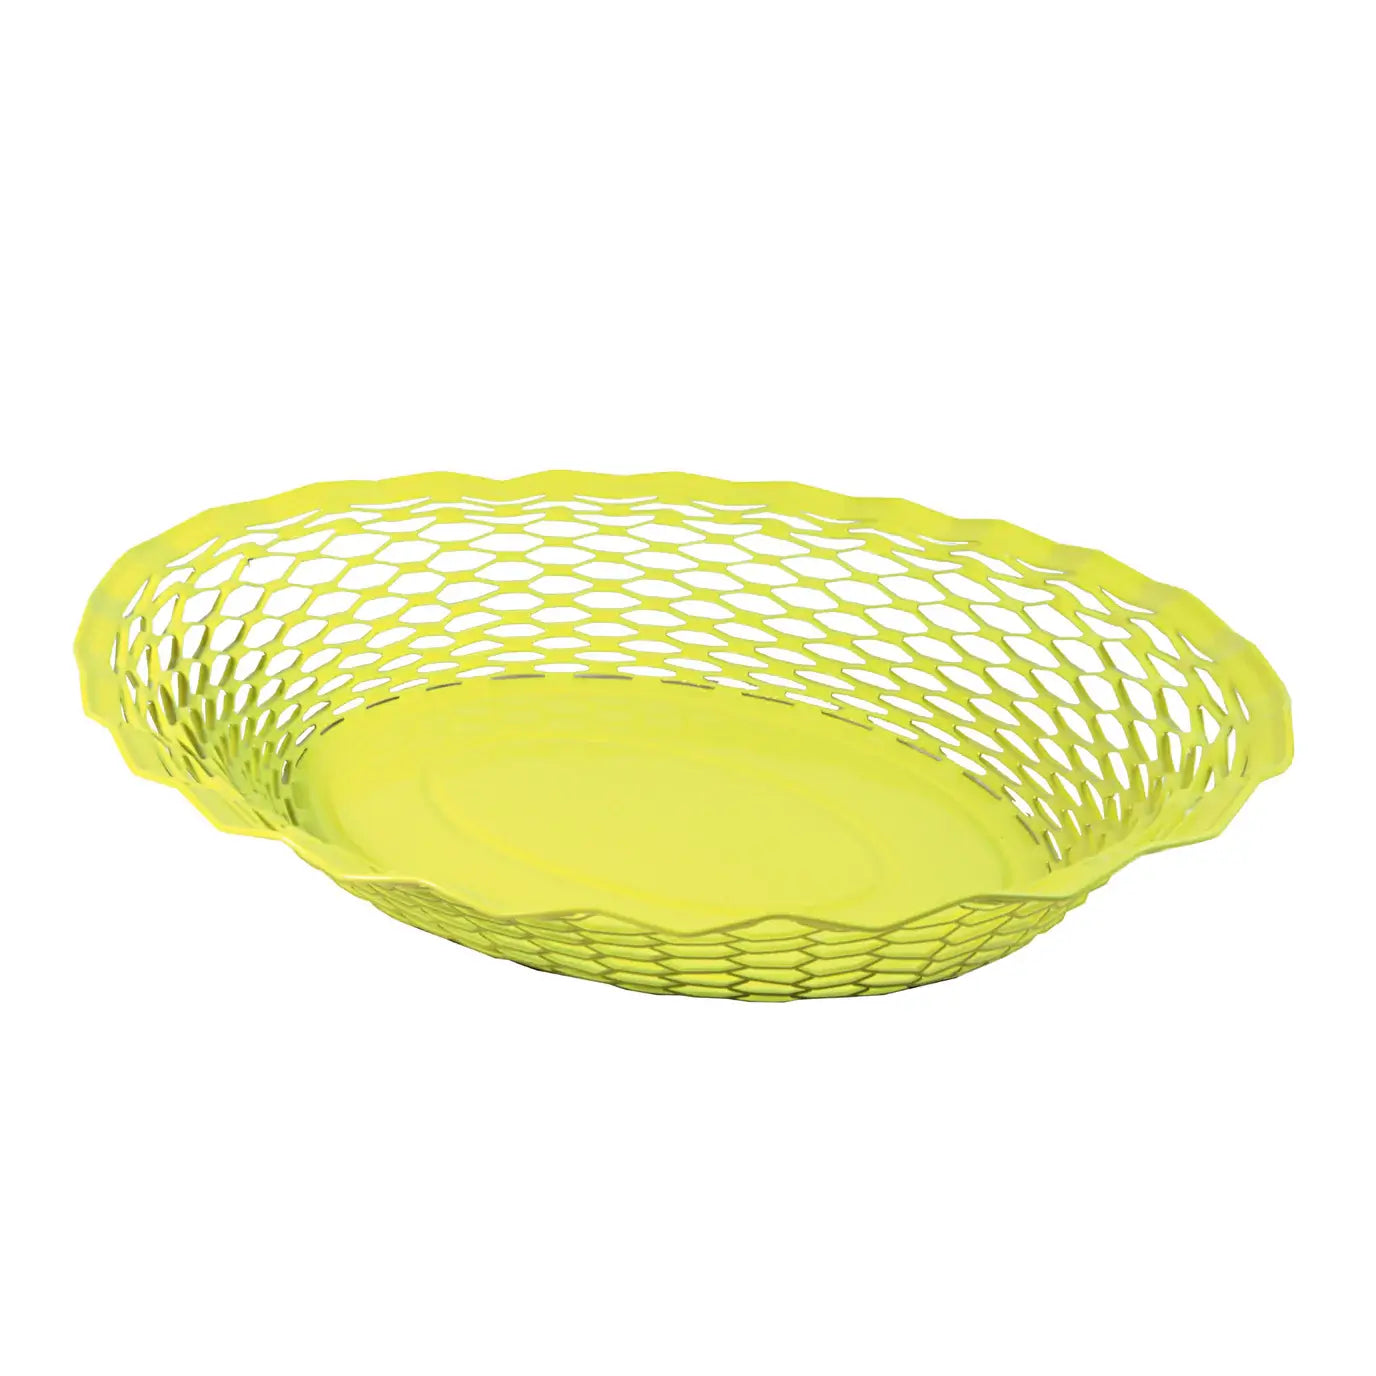 Metal Food Basket Large by Roger Orfèvre Kitchen ROGER ORFÈVRE Yellow Prettycleanshop